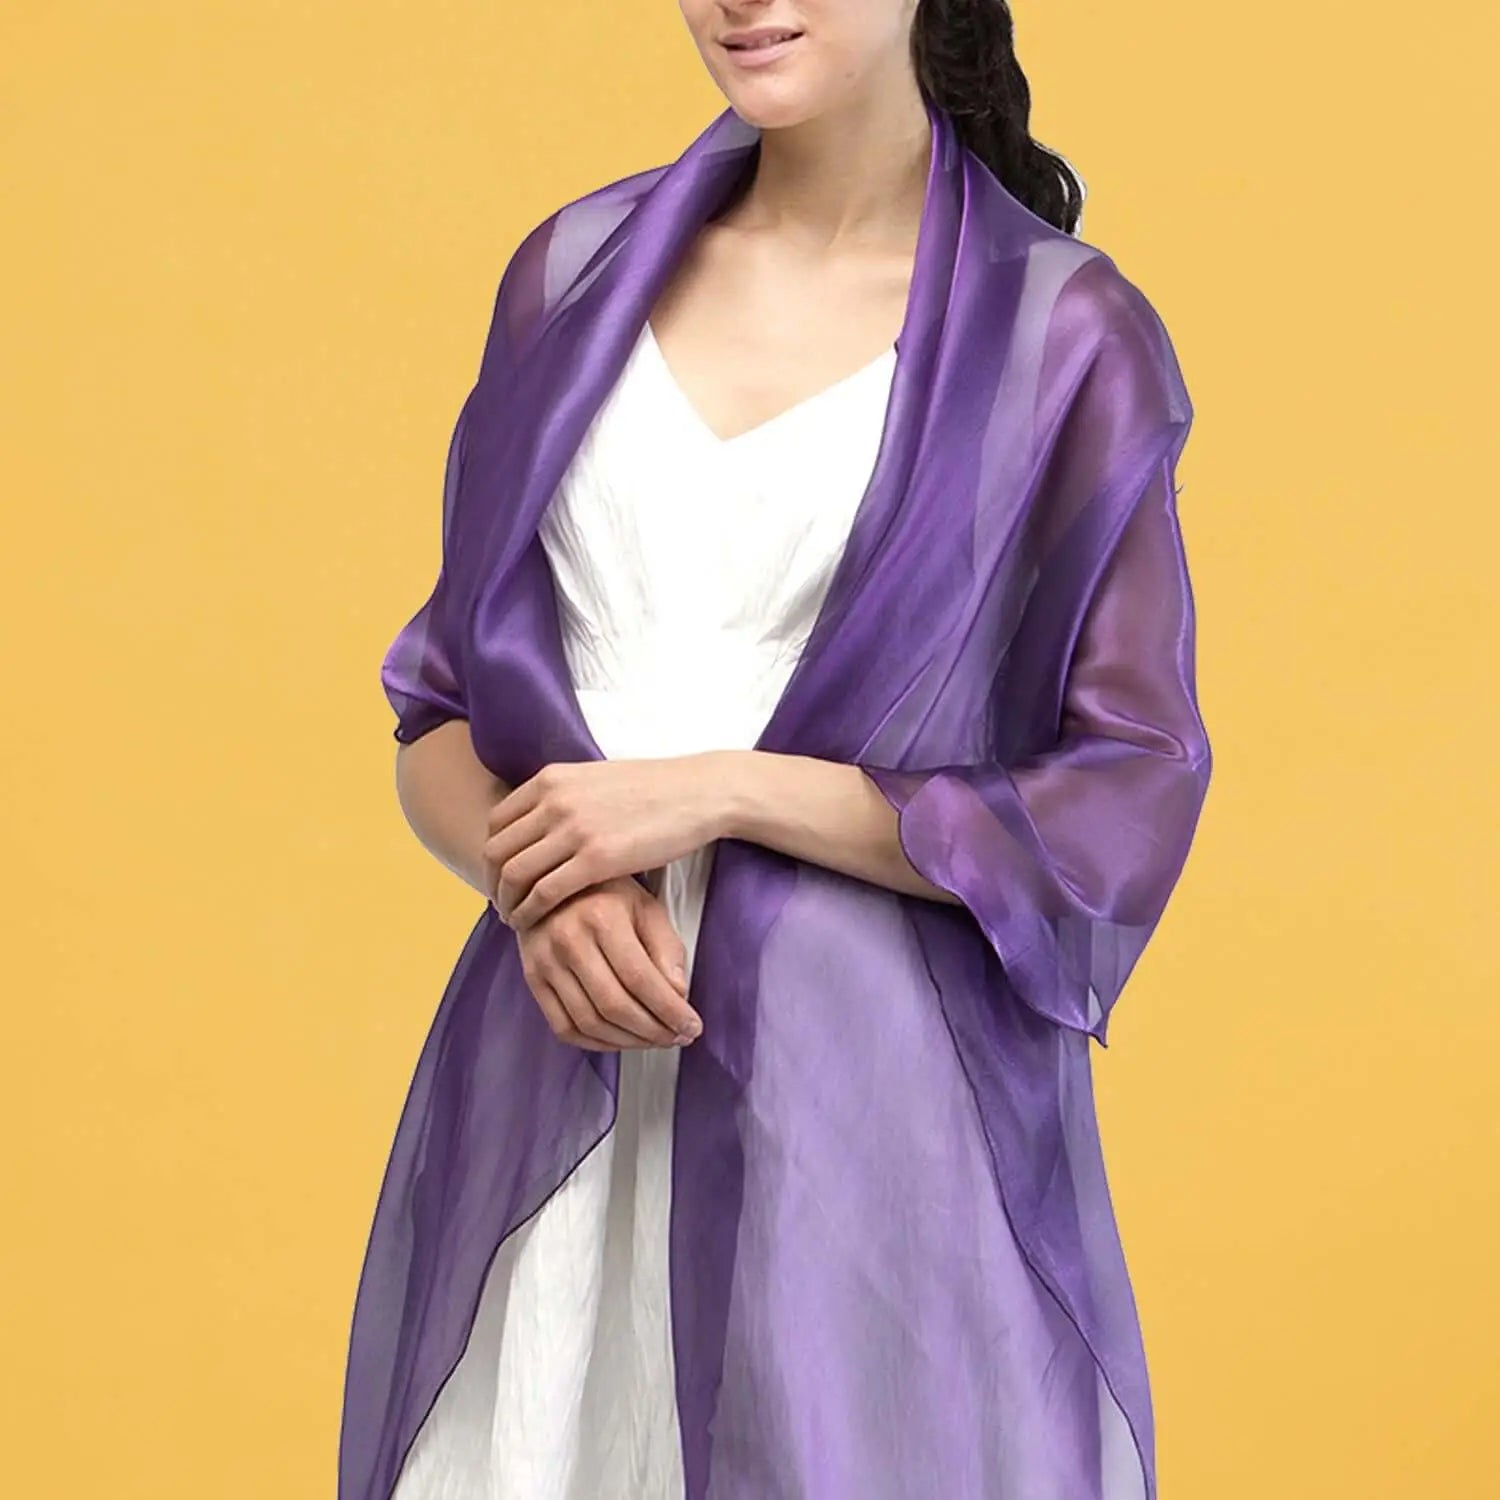 Woman wearing purple shawl from Sheer Shimmer Evening Lightweight Stole collection